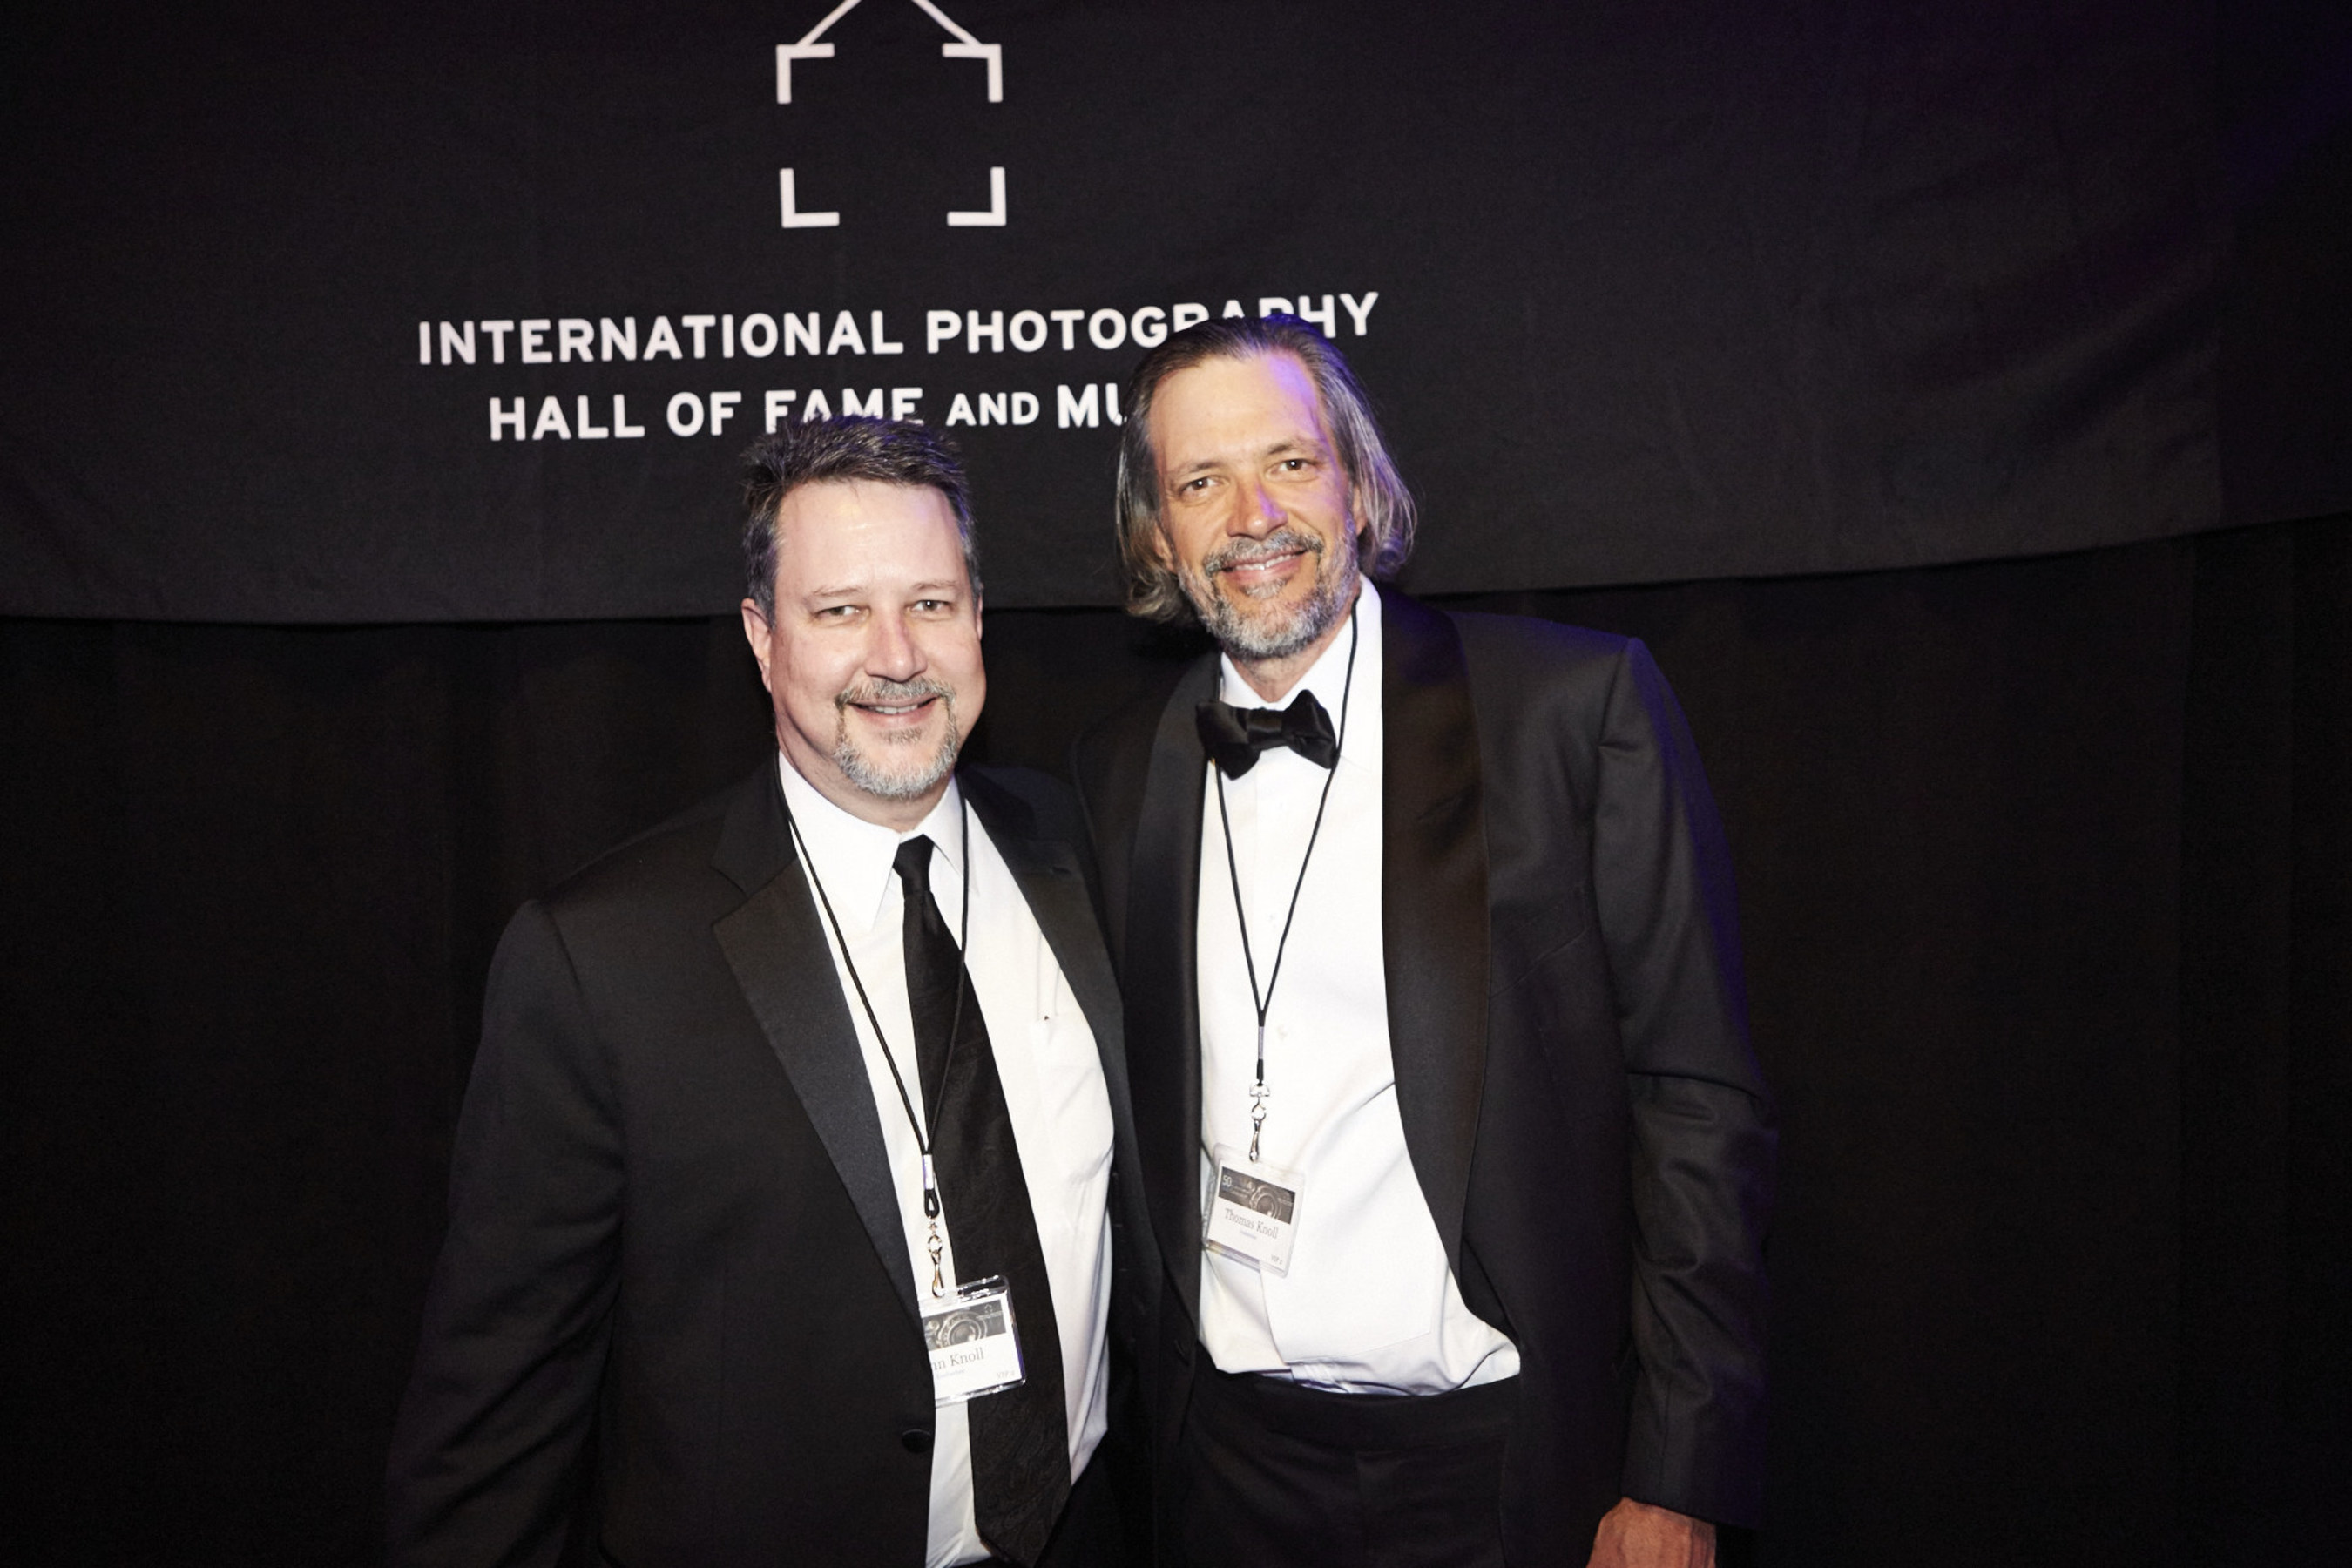 John and Thomas Knoll, co-creators of Adobe Photoshop and brothers, celebrate their induction into the International Photography Hall of Fame and Museum, located in St. Louis, Mo.